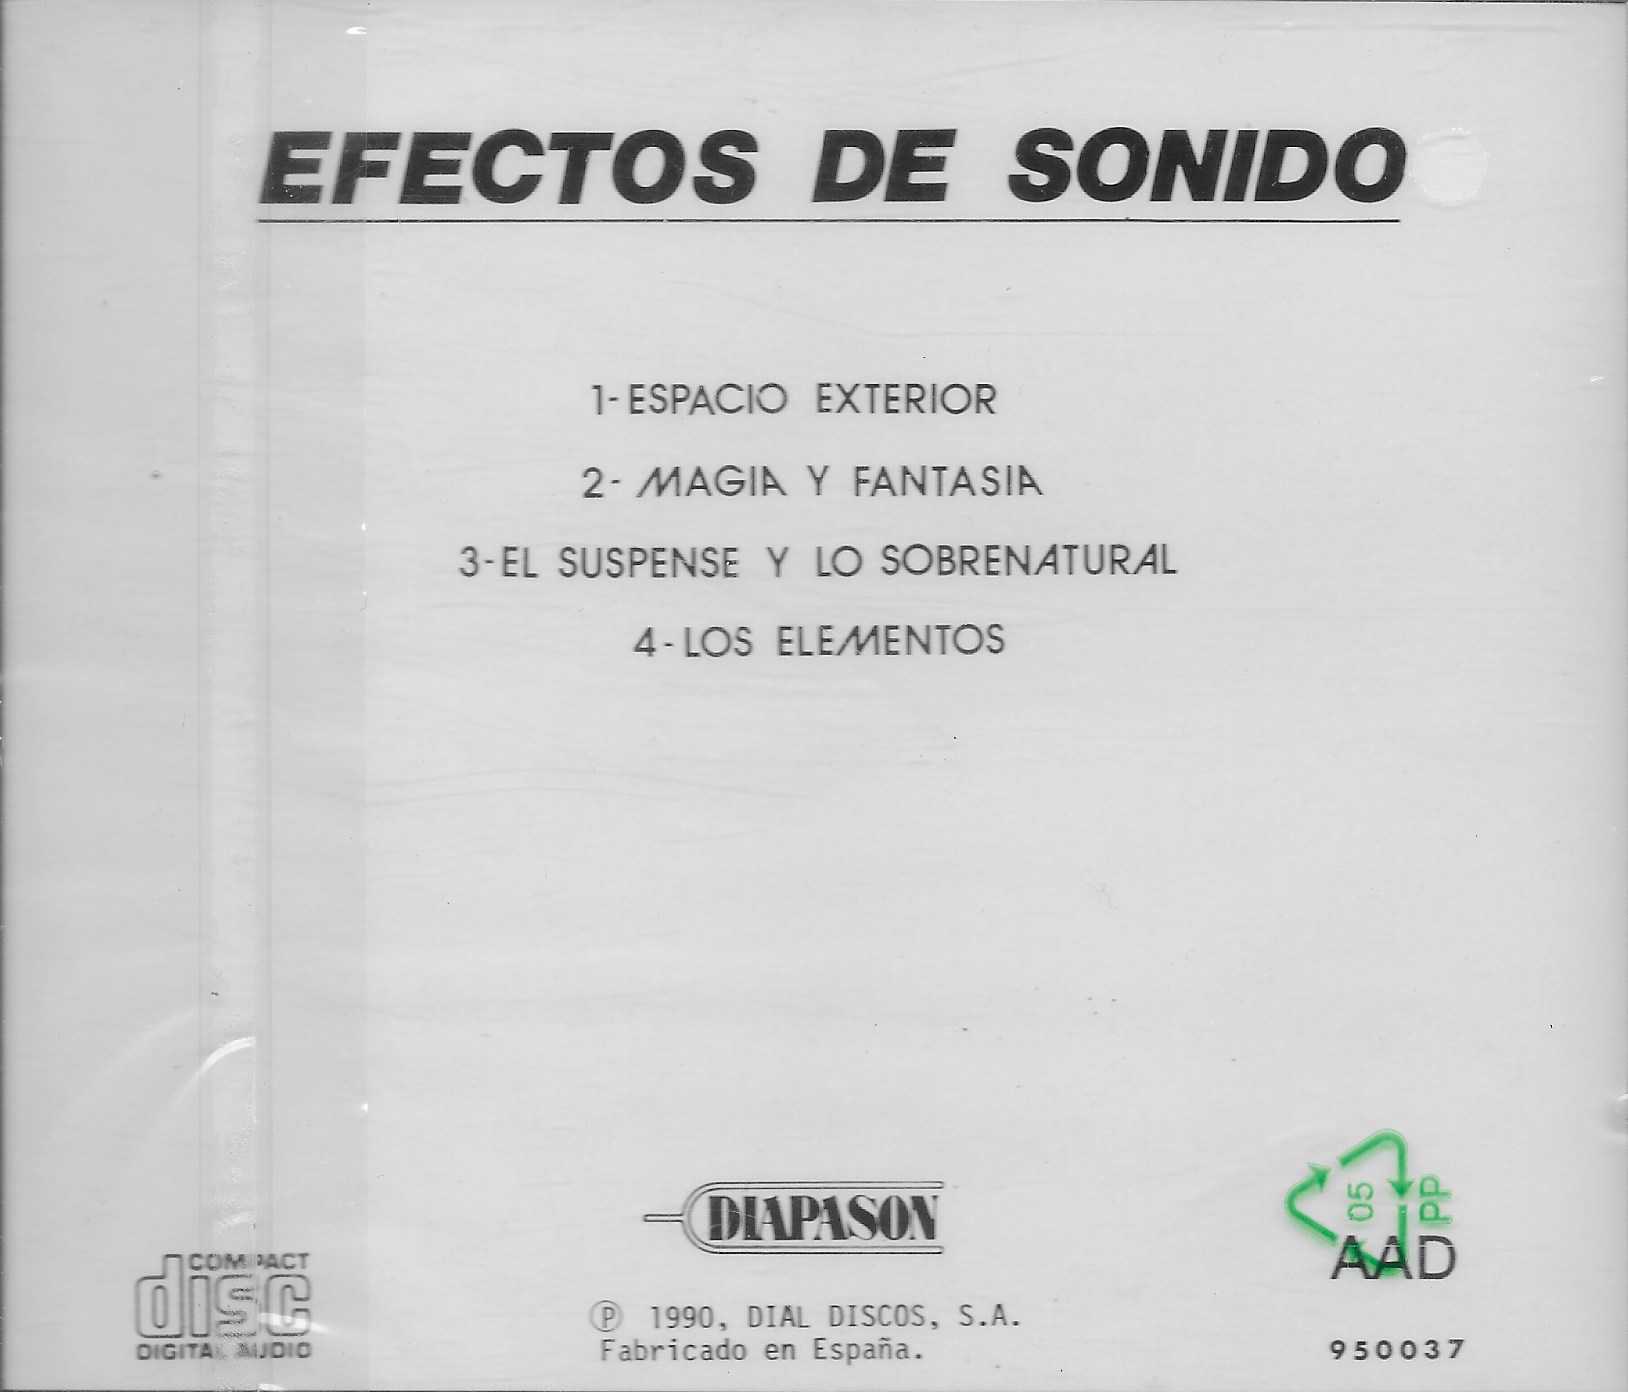 Picture of 95 0037 Effectos de sonido - Volume 12 by artist Various from the BBC records and Tapes library